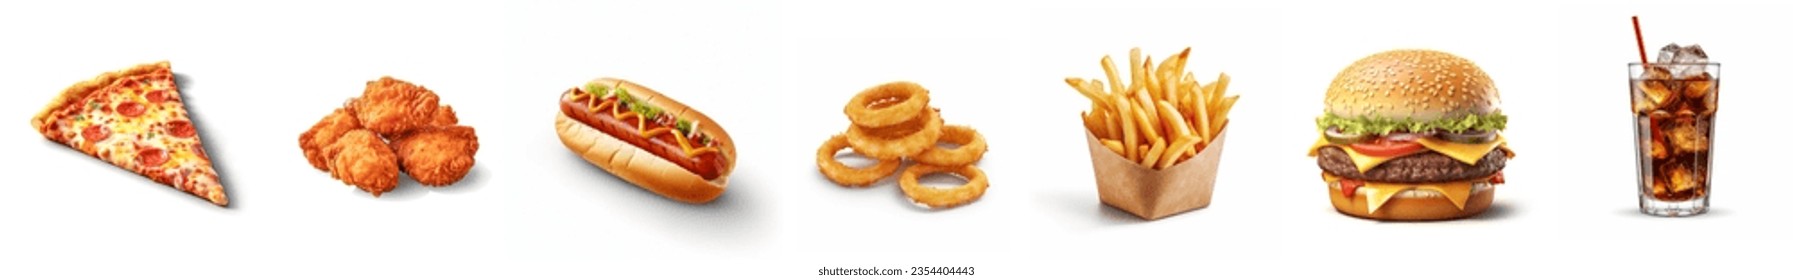 Set of fast food dishes isolated on white background. pizza, fried chicken, hotdog, onion rings, fries, burger, soft drink . Abstract collection of fast food.
					